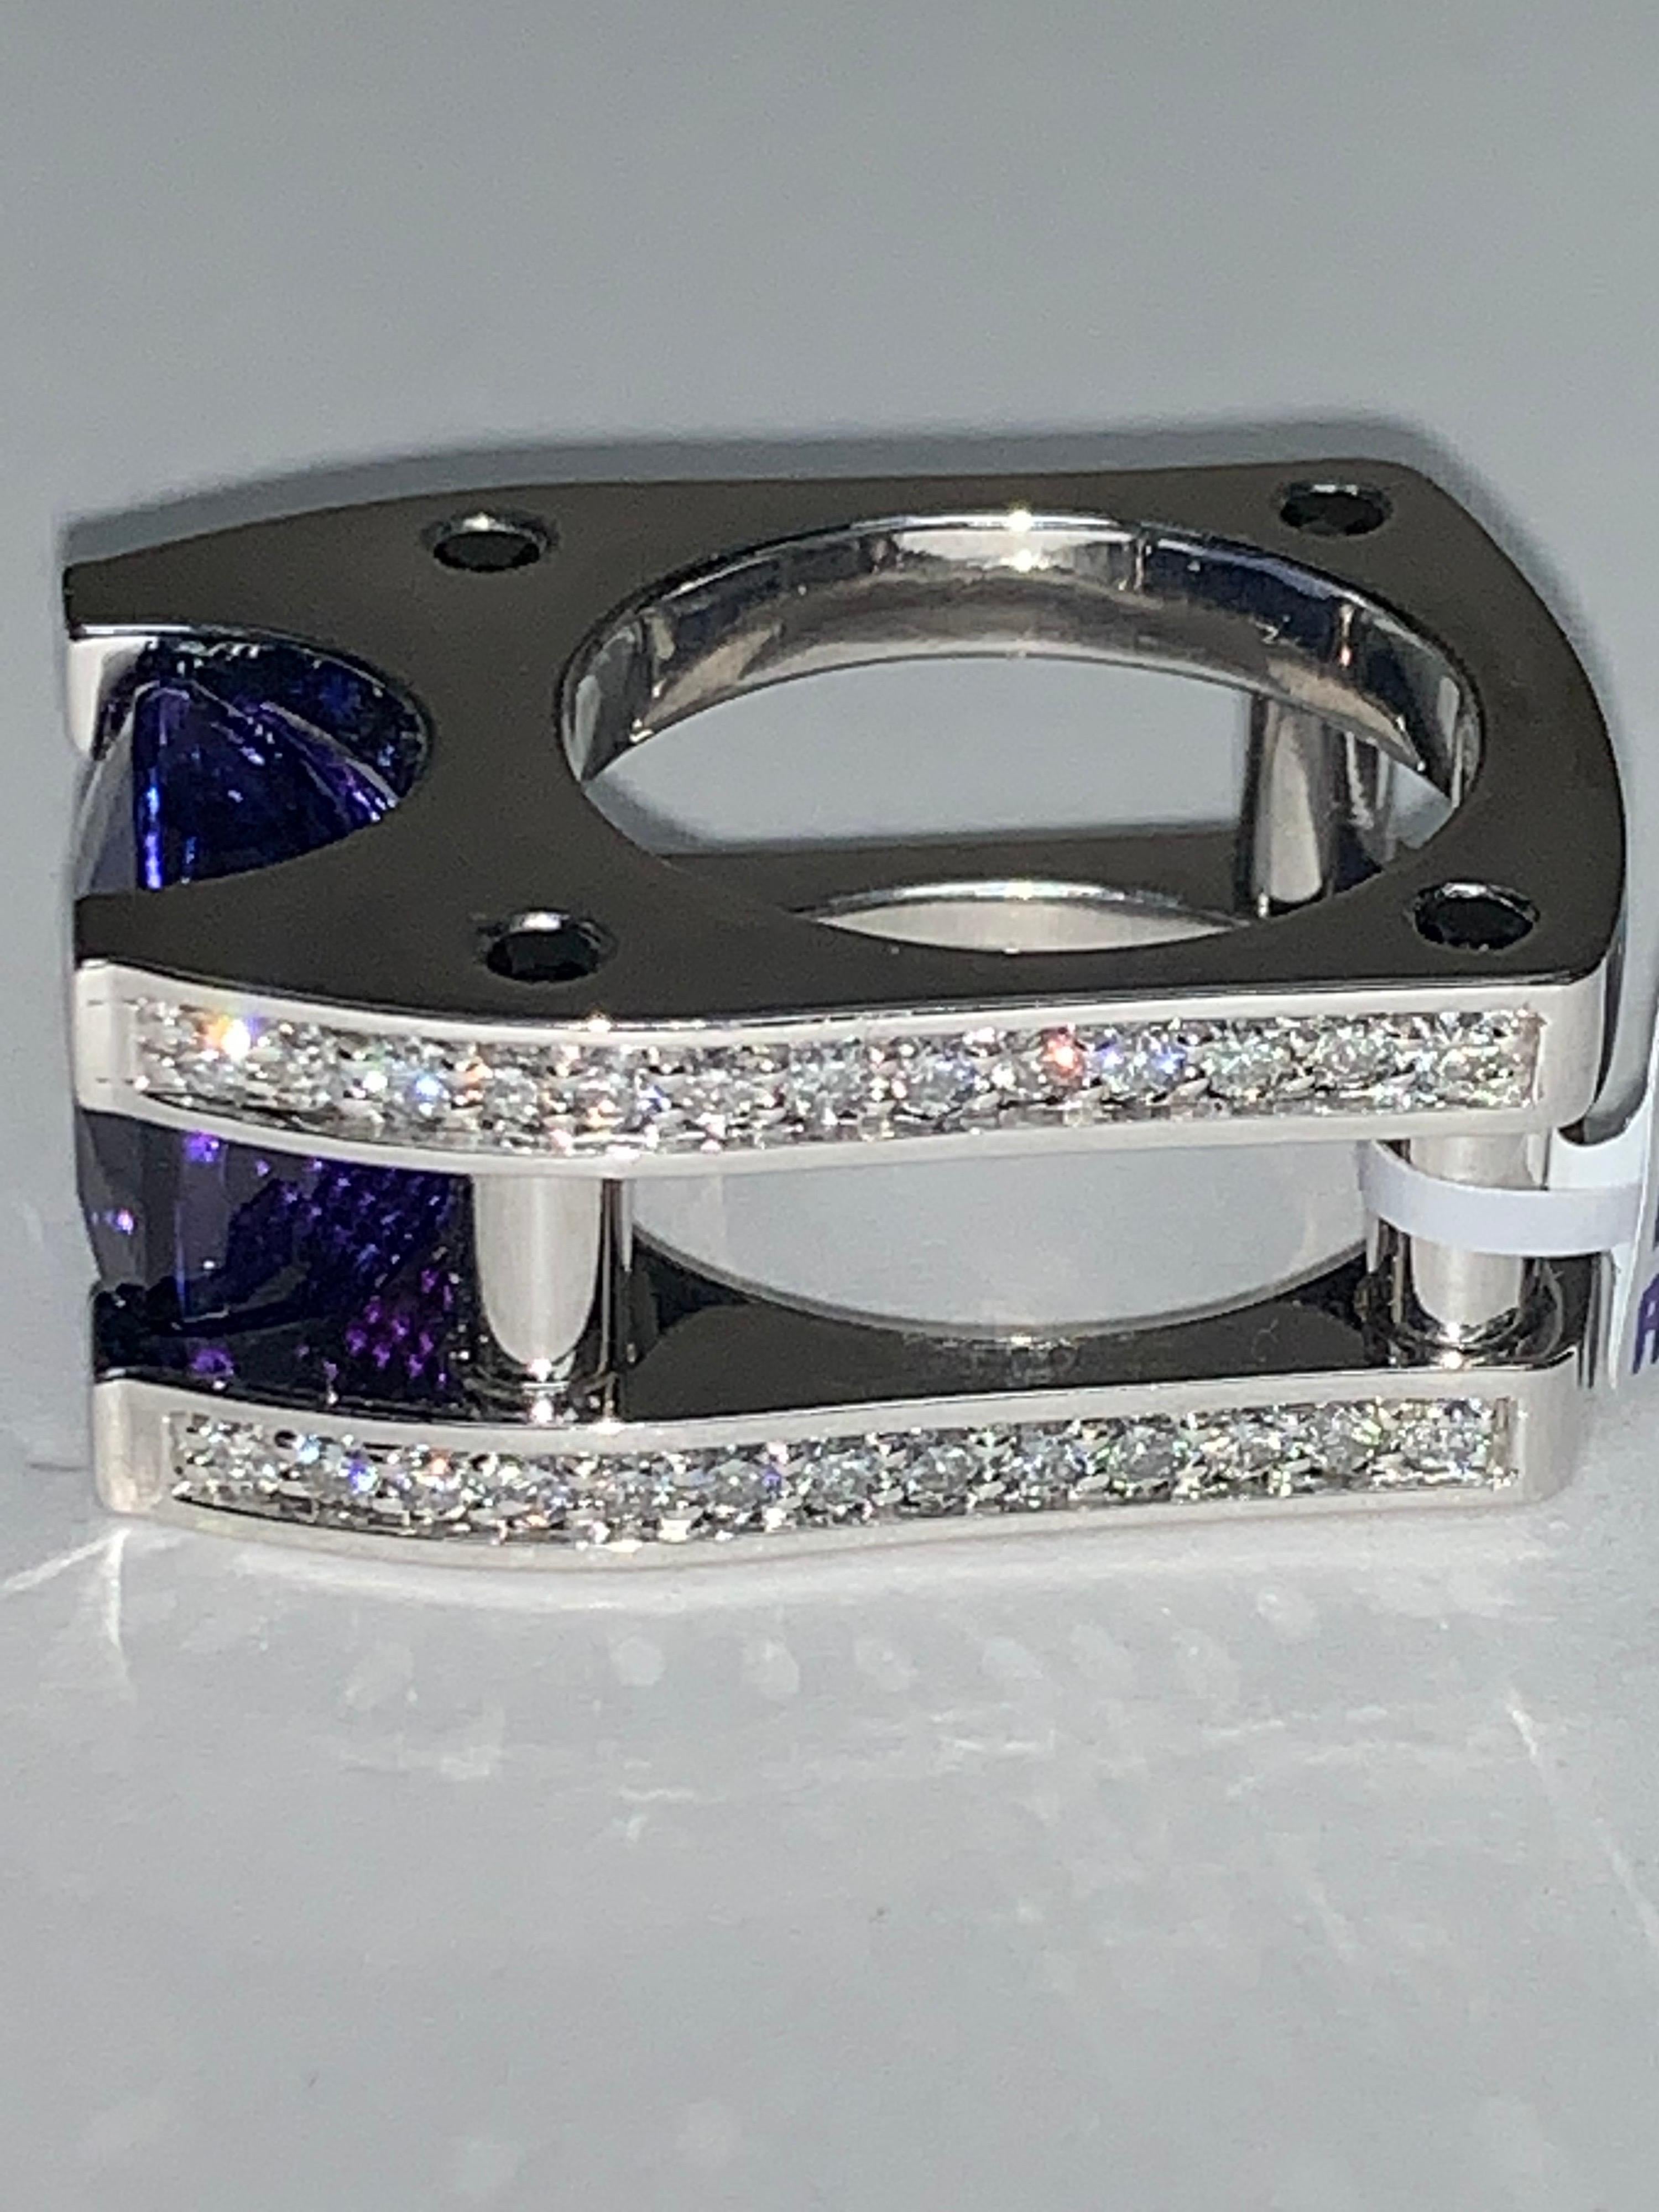 Sophisticated stunning amazing Hand crafted Tanzanite Center Stone that is embellished by white pave diamonds on 2 sides of the 18K White Band.  This one-of-a-kind ring is nothing like you will ever see again.  

20.18 Carat Tanzanite
1.62 Carat